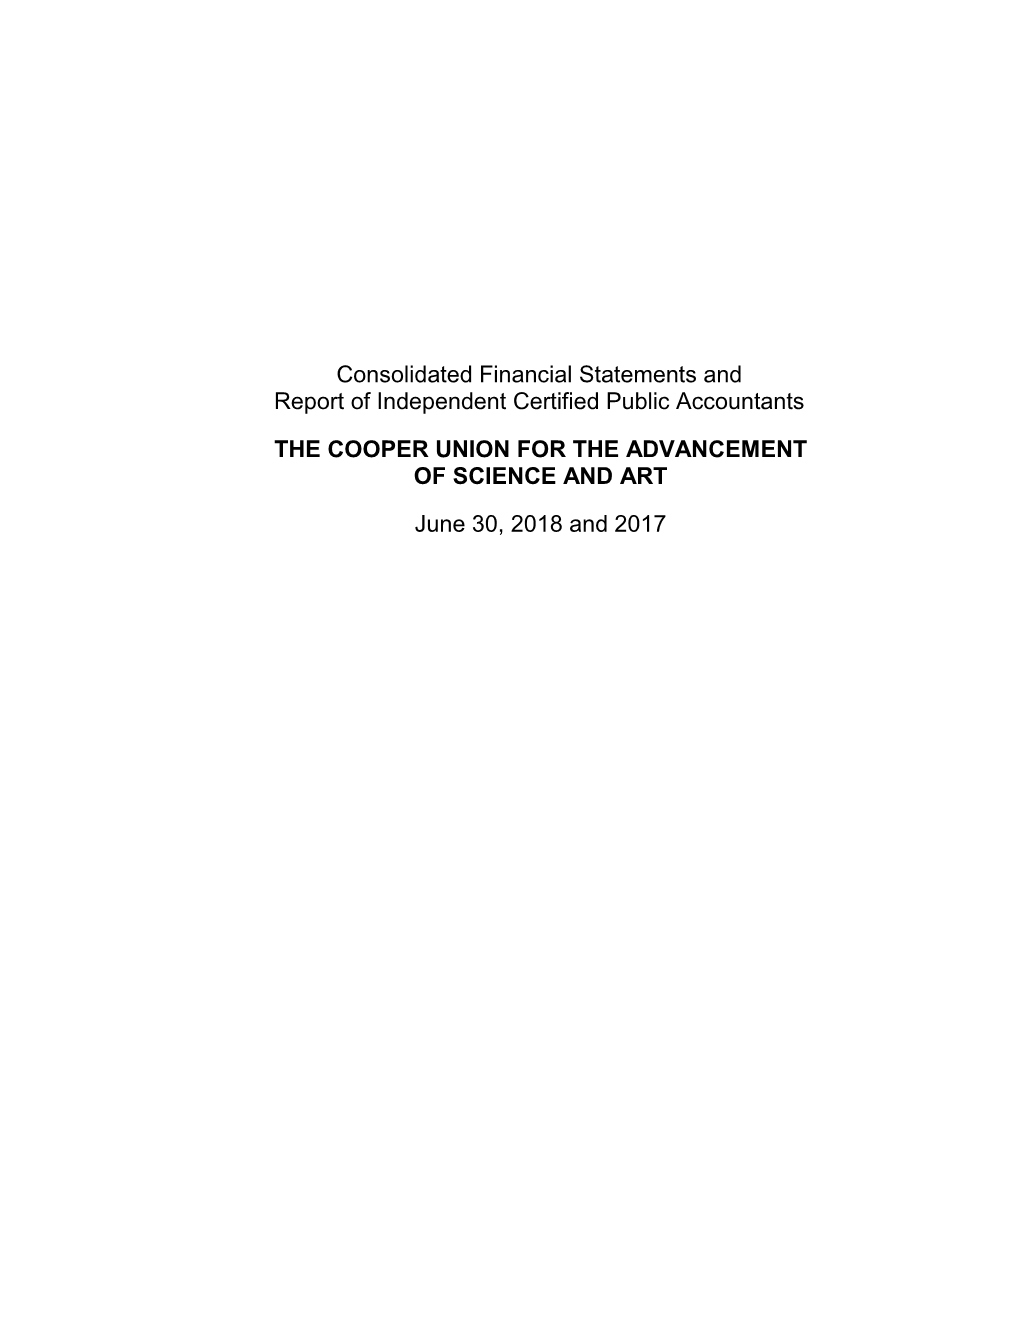 Consolidated Financial Statements and Report of Independent Certified Public Accountants the COOPER UNION for the ADVANCEMENT OF